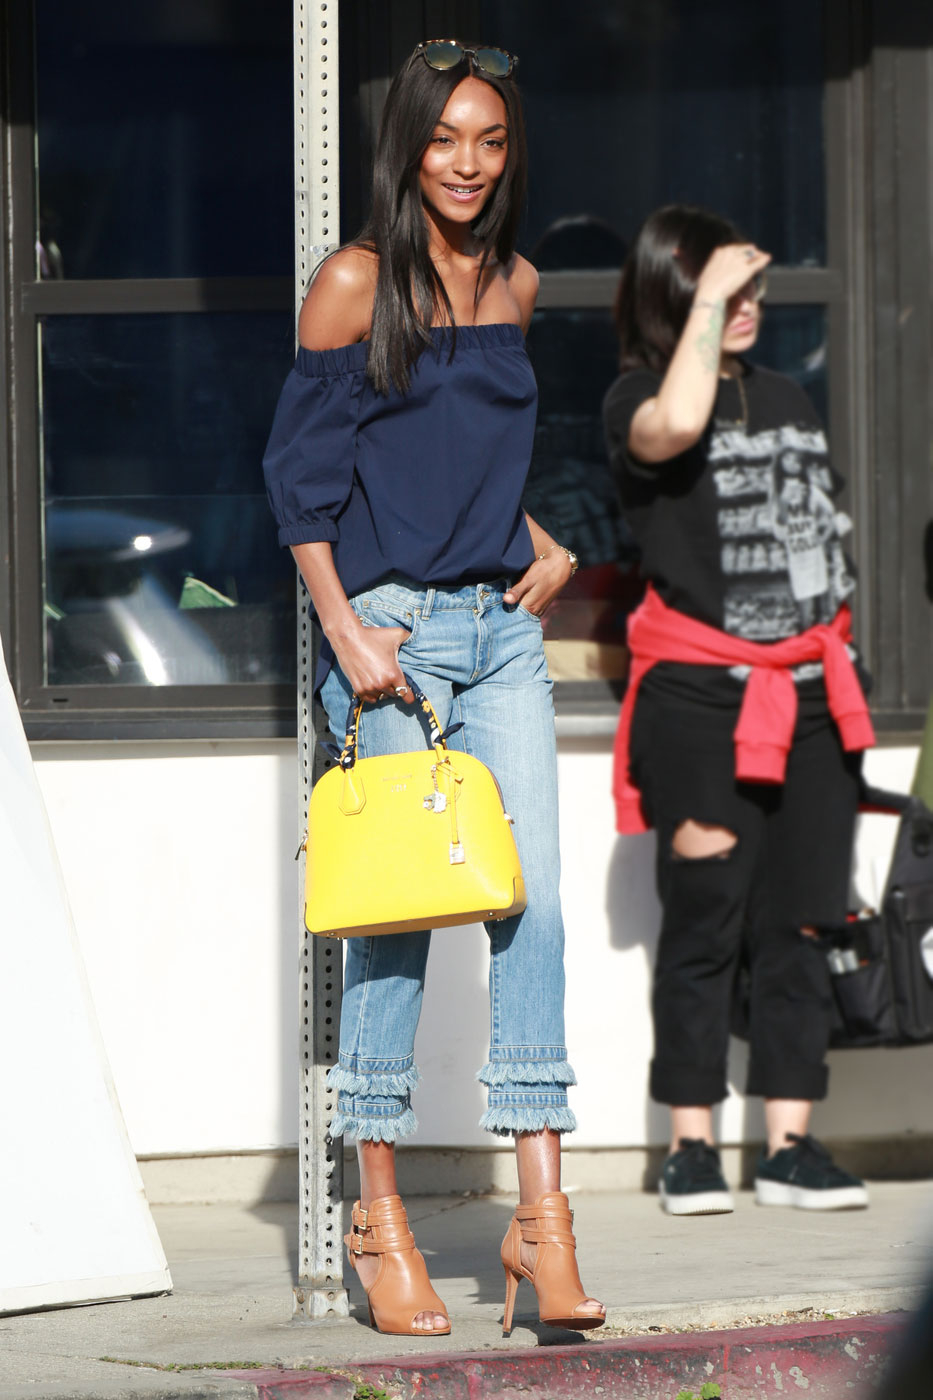 Jourdan Dunn pairs a navy off-the-shoulder top with fringe jeans and a yellow satchel.